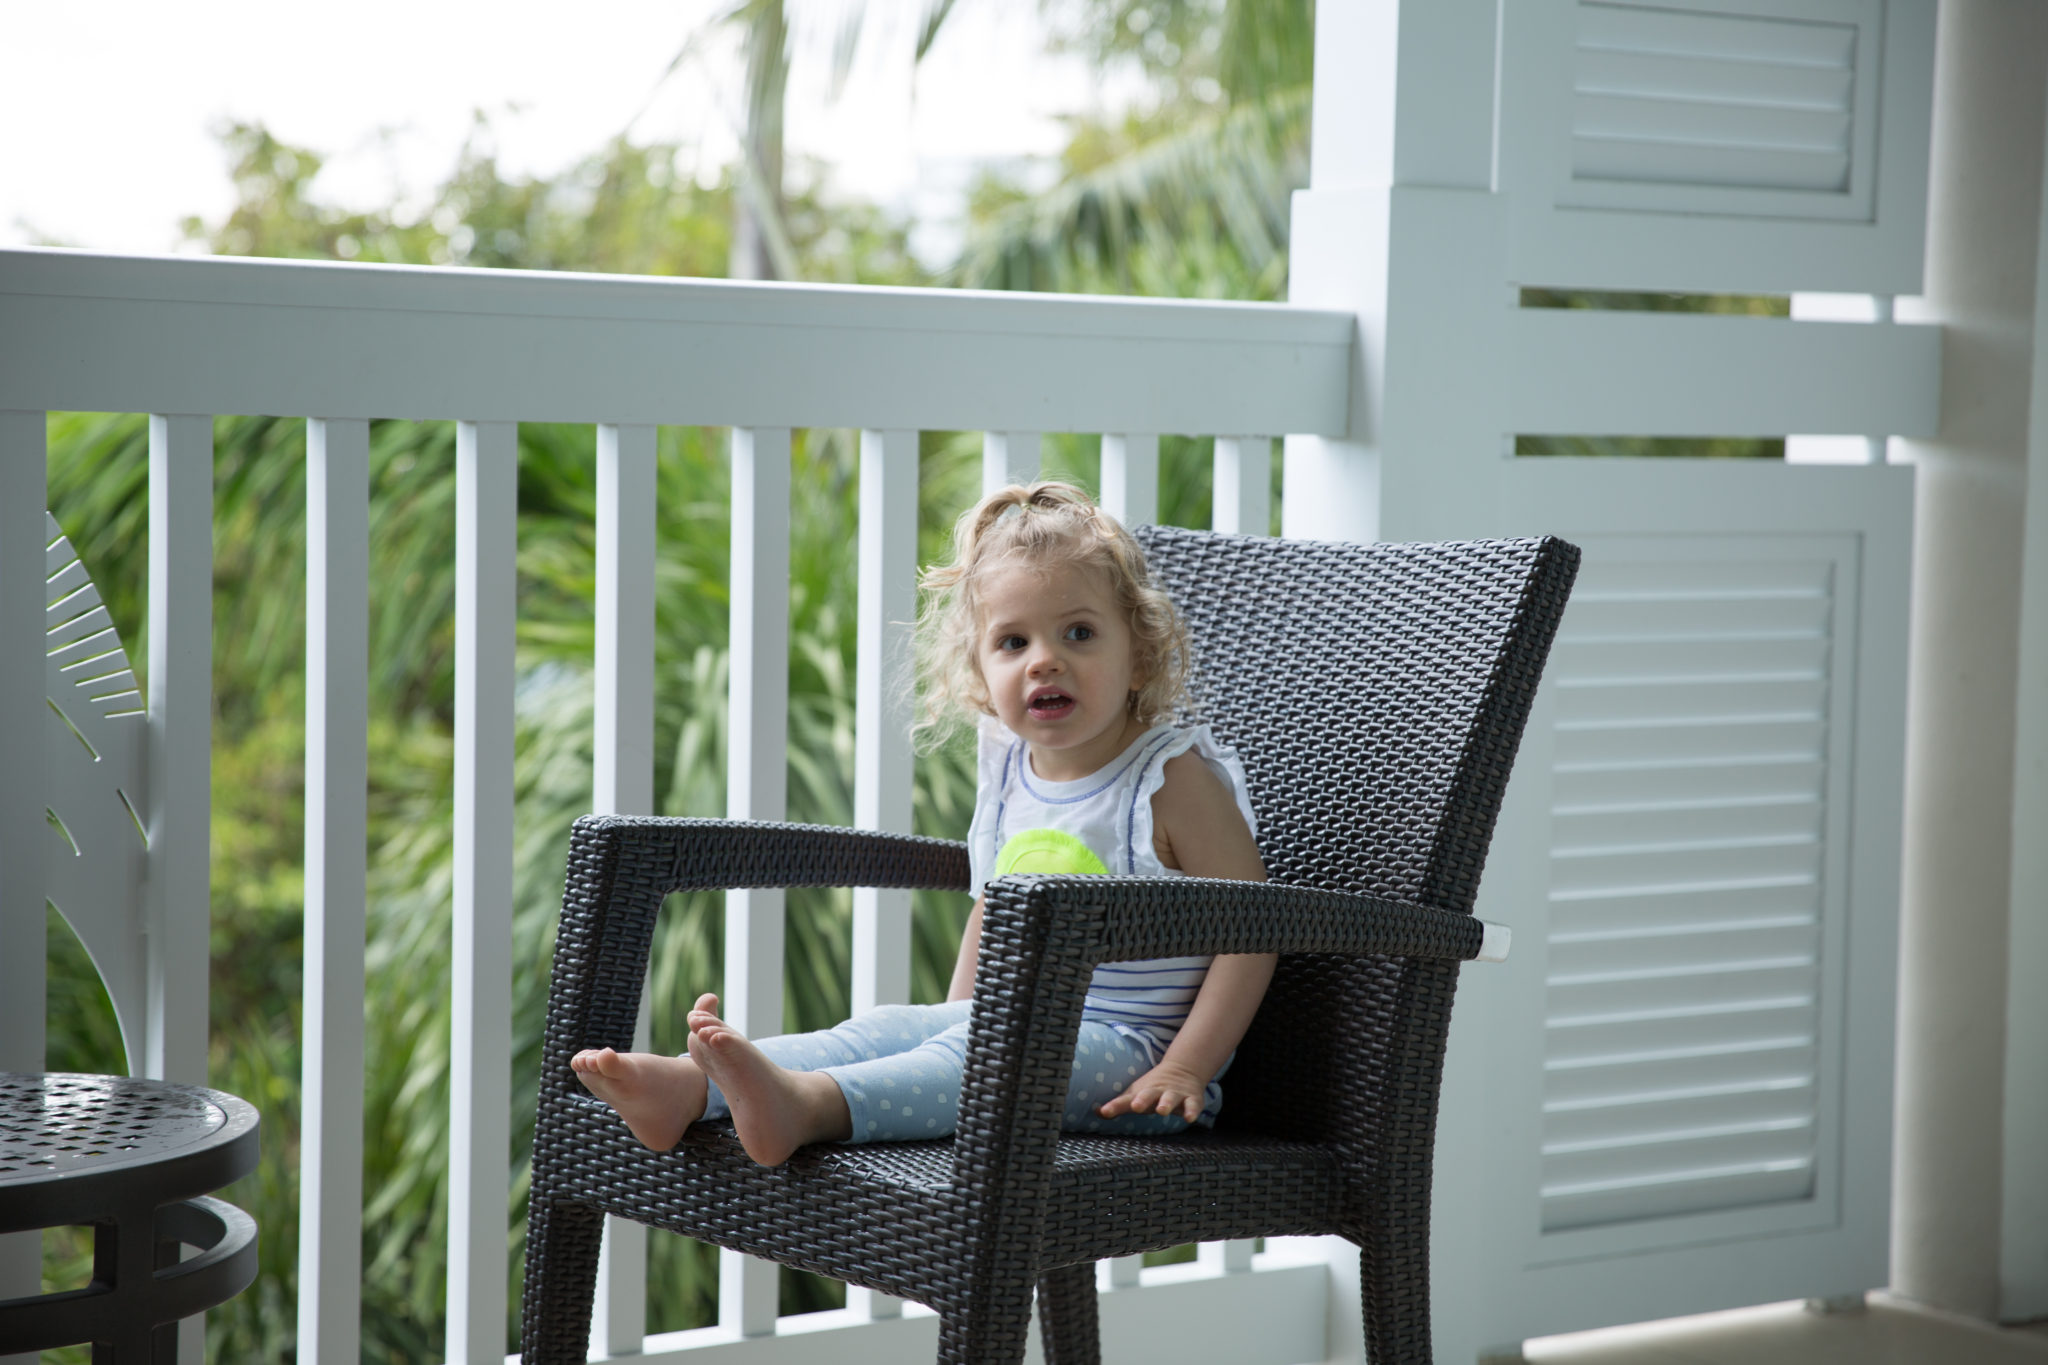 what to do and where to stay in delray beach florida | summer toddler style | summer style | beach style | west palm beach flordia | seagate hotel delray beach florida | family vacation with a toddler